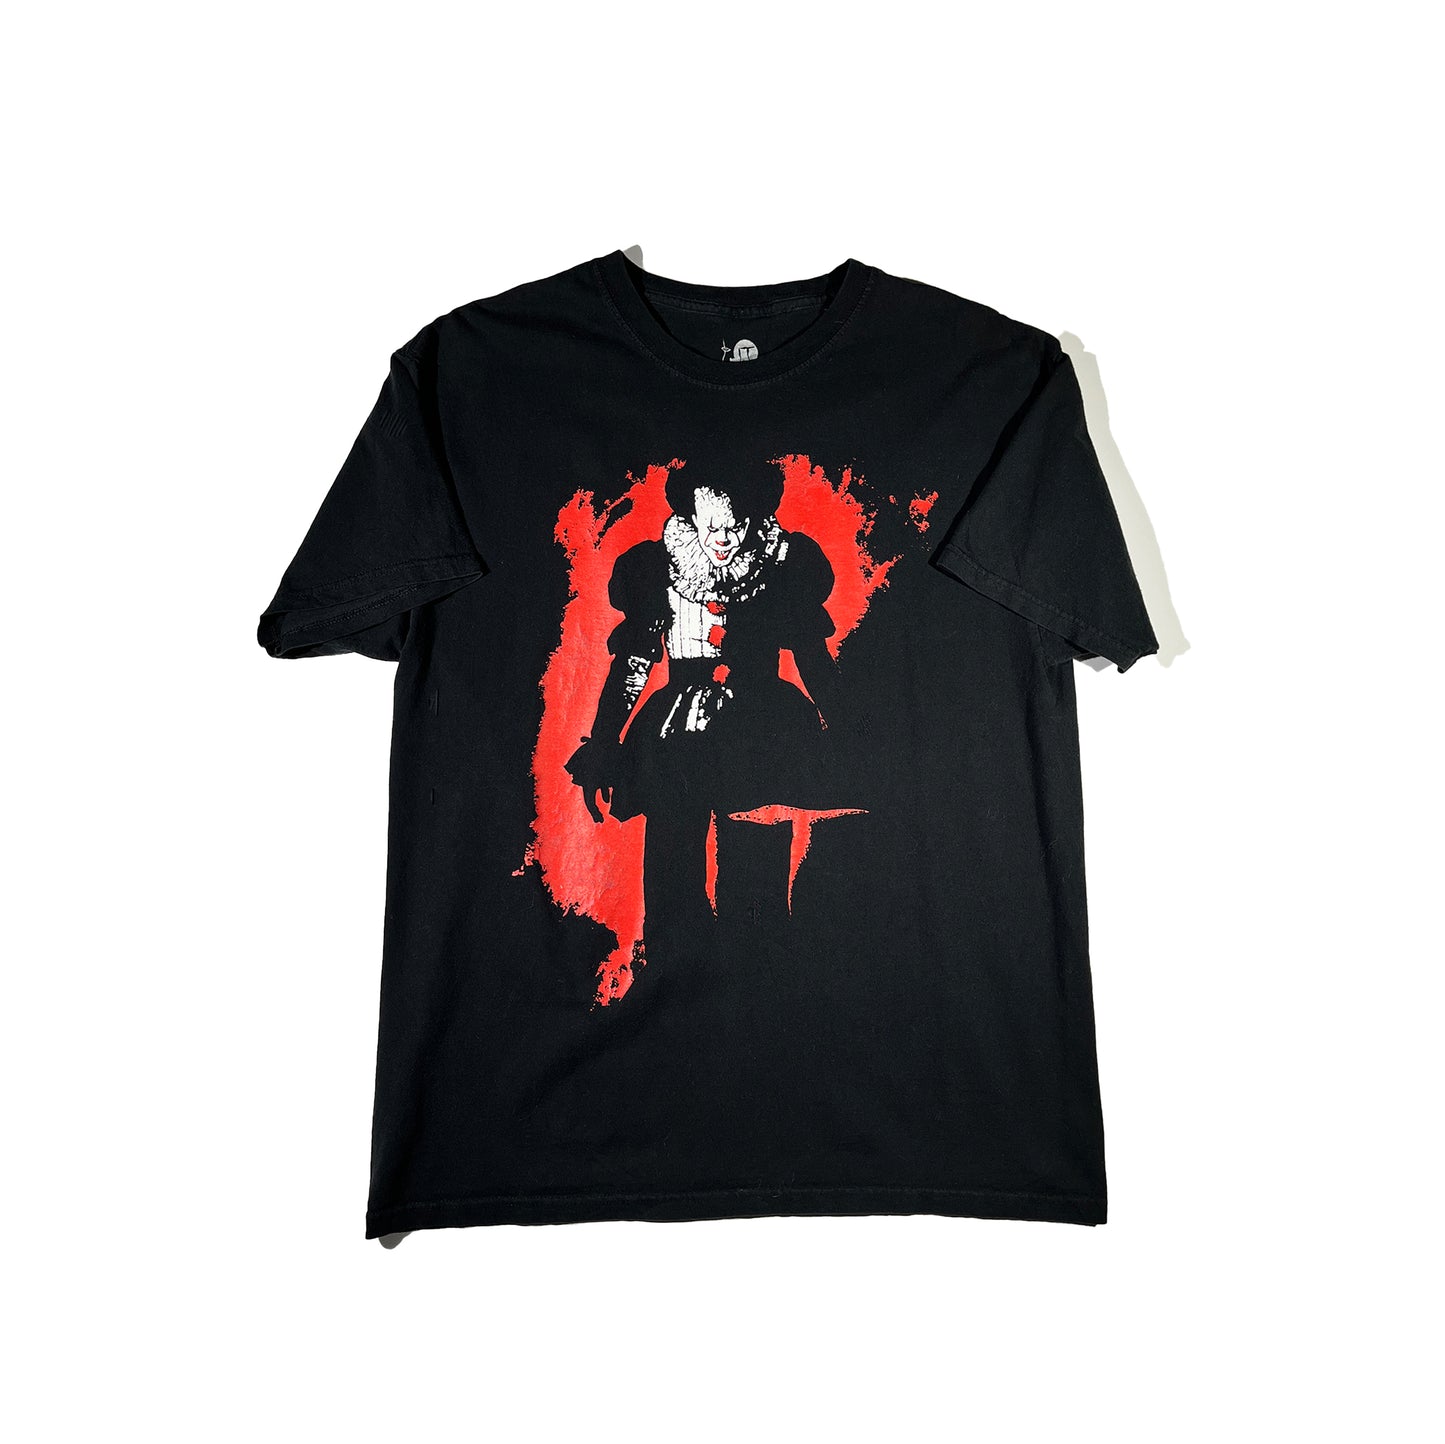 Vintage IT T-Shirt Clown Movie Scary